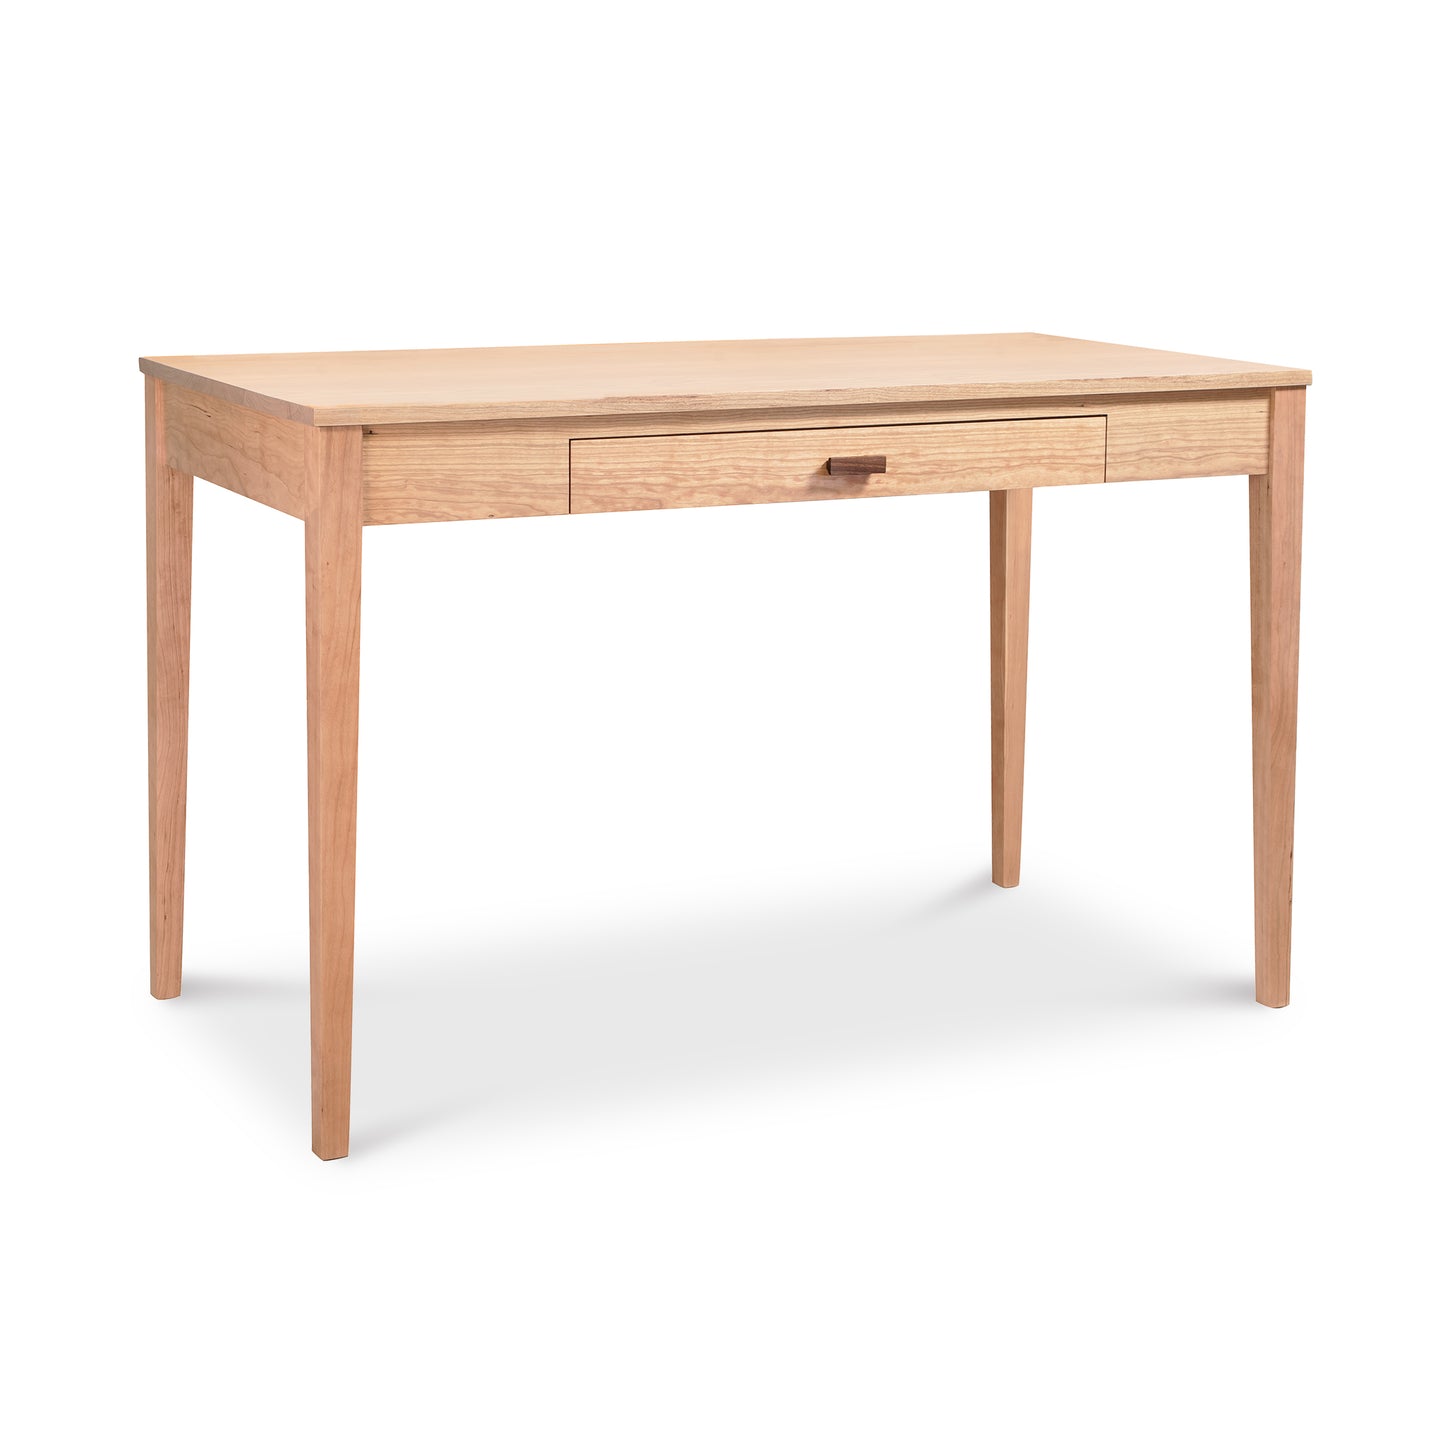 An Maple Corner Woodworks Andover Modern Writing Desk, crafted from solid wood in a natural cherry finish, with a single centered drawer, isolated on a white background.